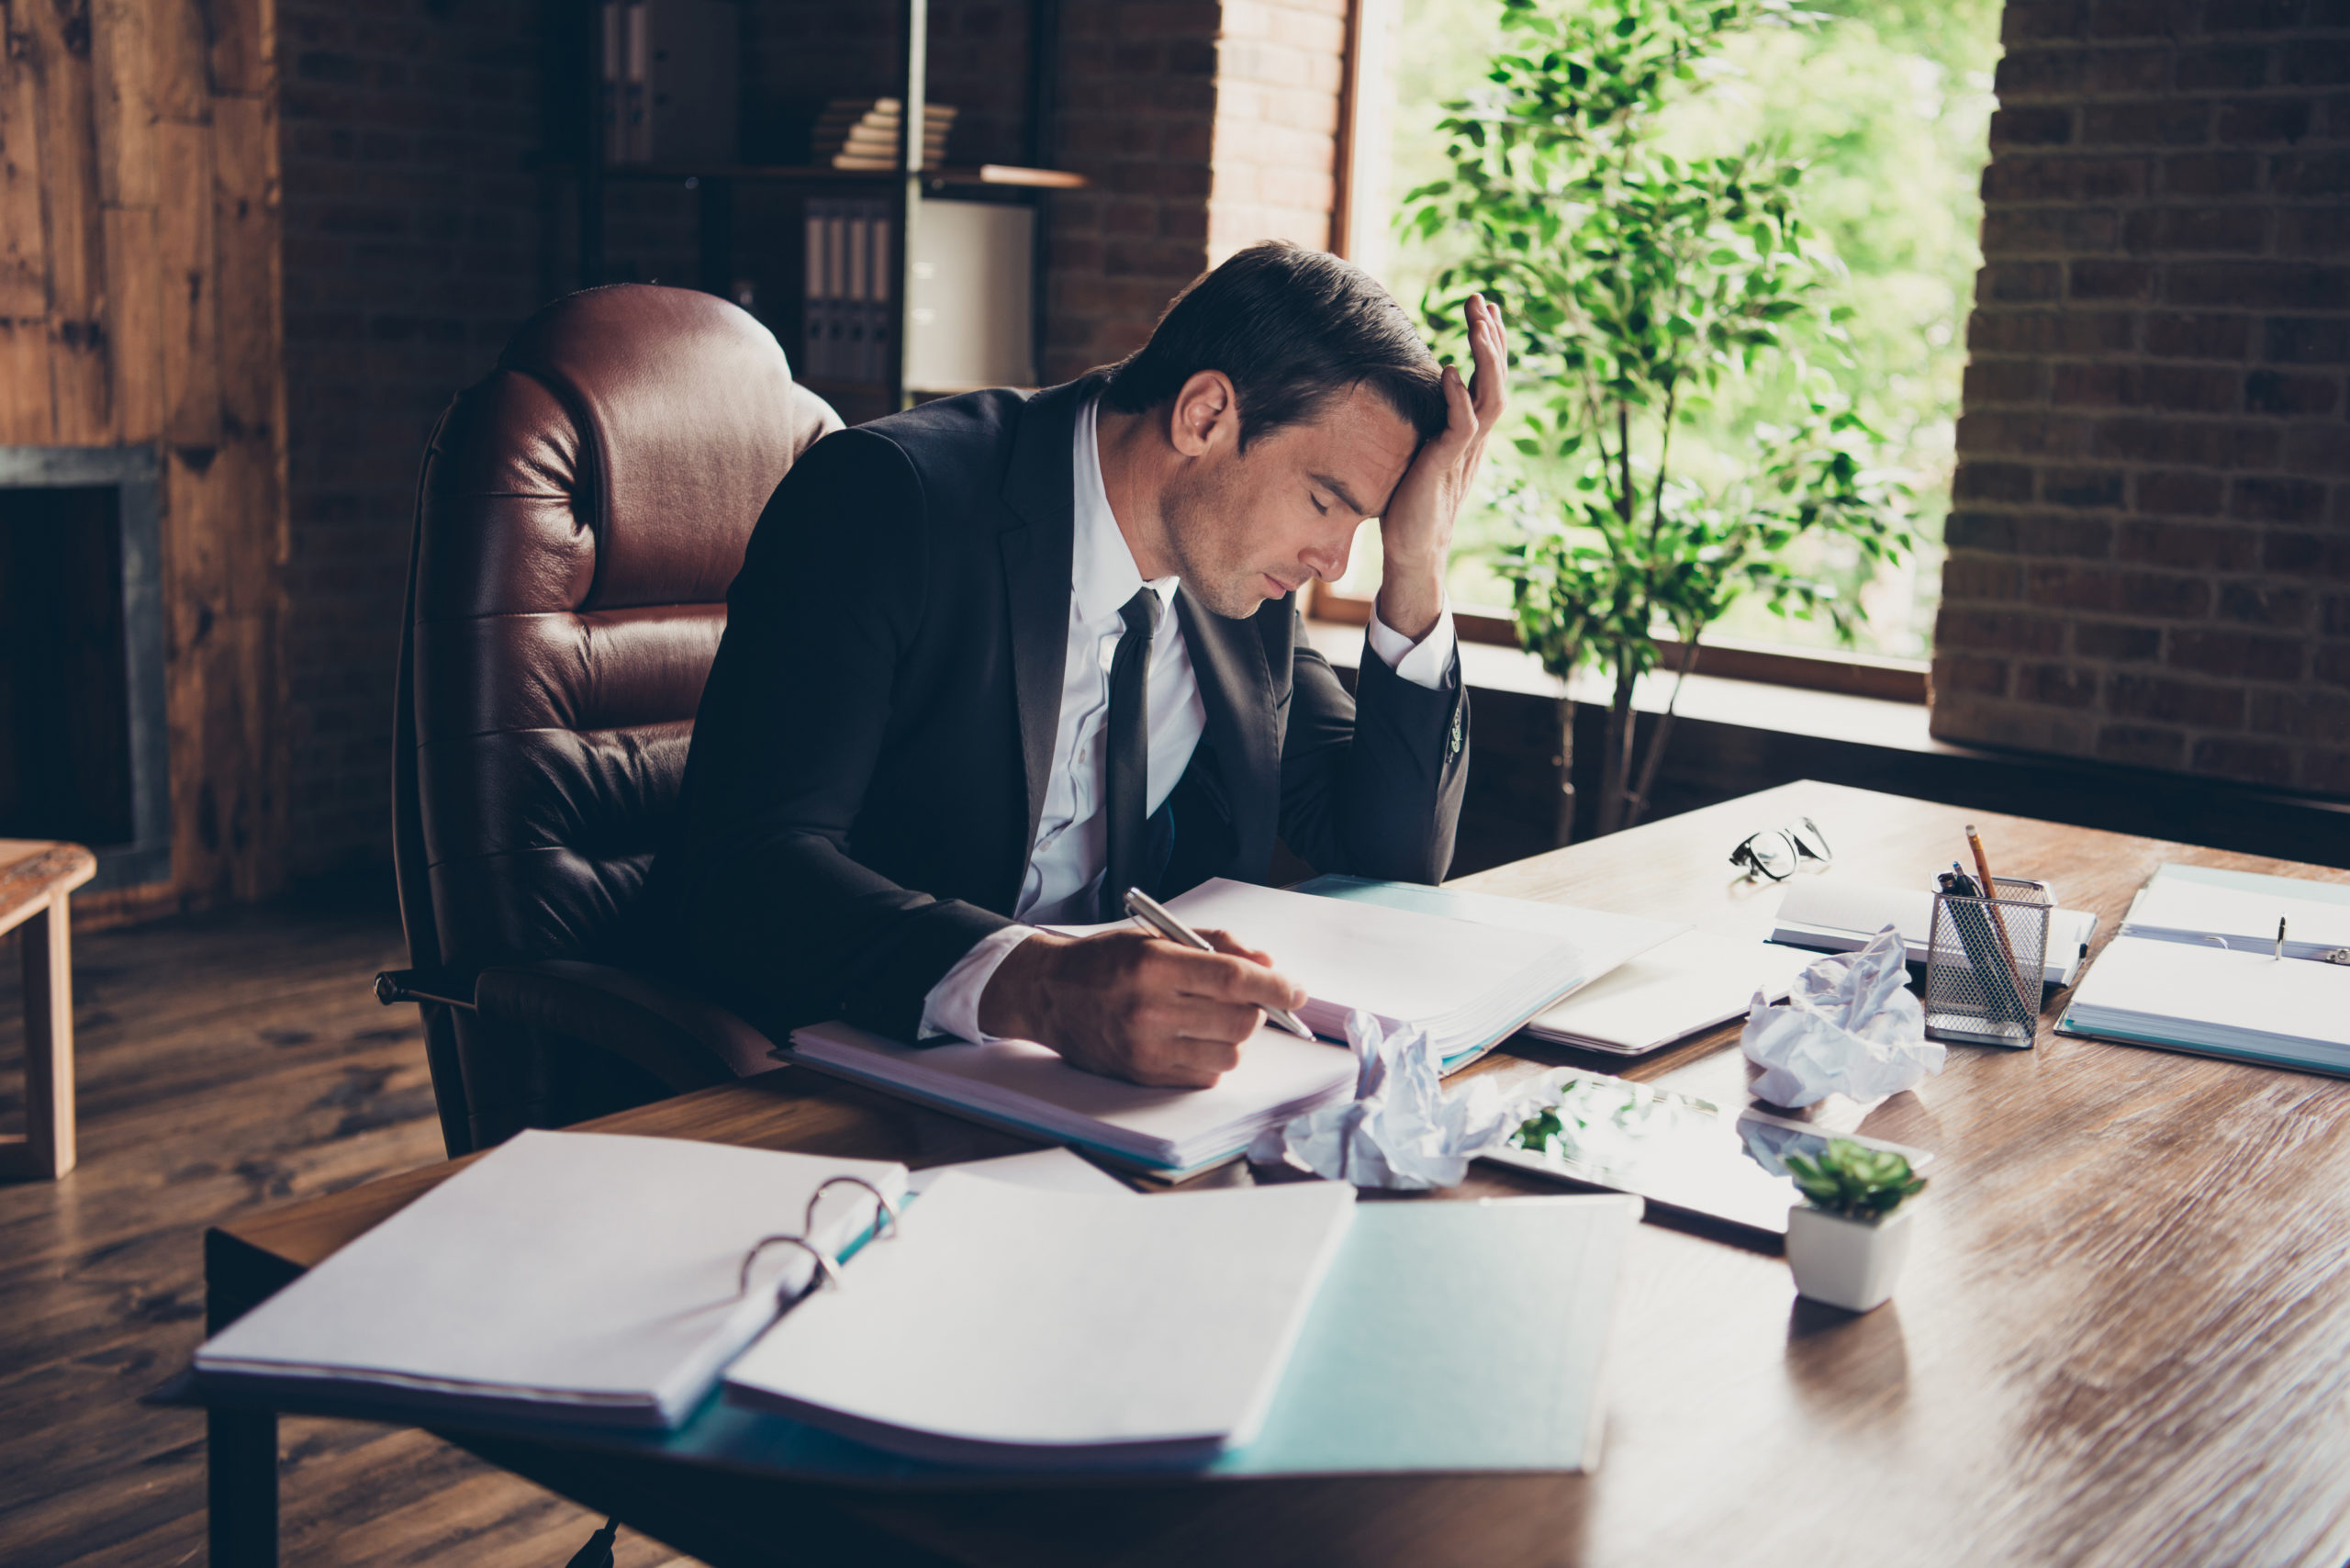 Profile side view portrait of elegant classy handsome sad man business shark ceo boss chief attorney lawyer writing article fail failure at work place station table desktop